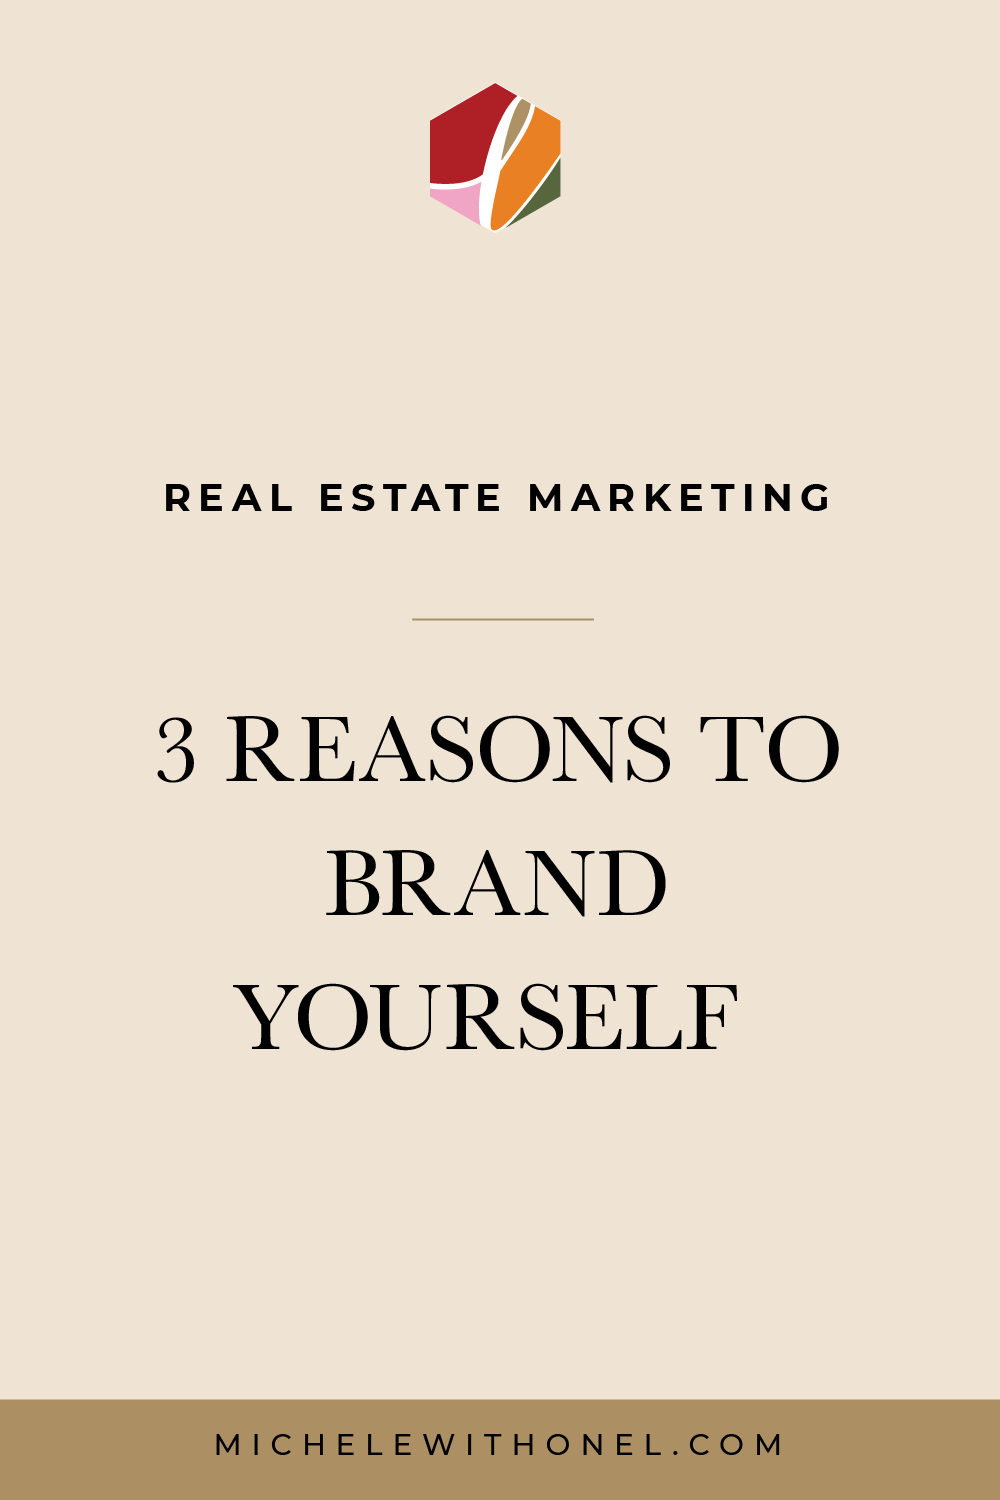 Real estate agents: Want to know how to market yourself in this quickly changing market? My quick tips for real estate marketing will give you three tips for standing out in a crowd — including how to create consistency and trust, level up your visual branding, and schedule a personal brand photography session (or two) that works for you! #personalbranding #realtor #realestatemarketing #branding